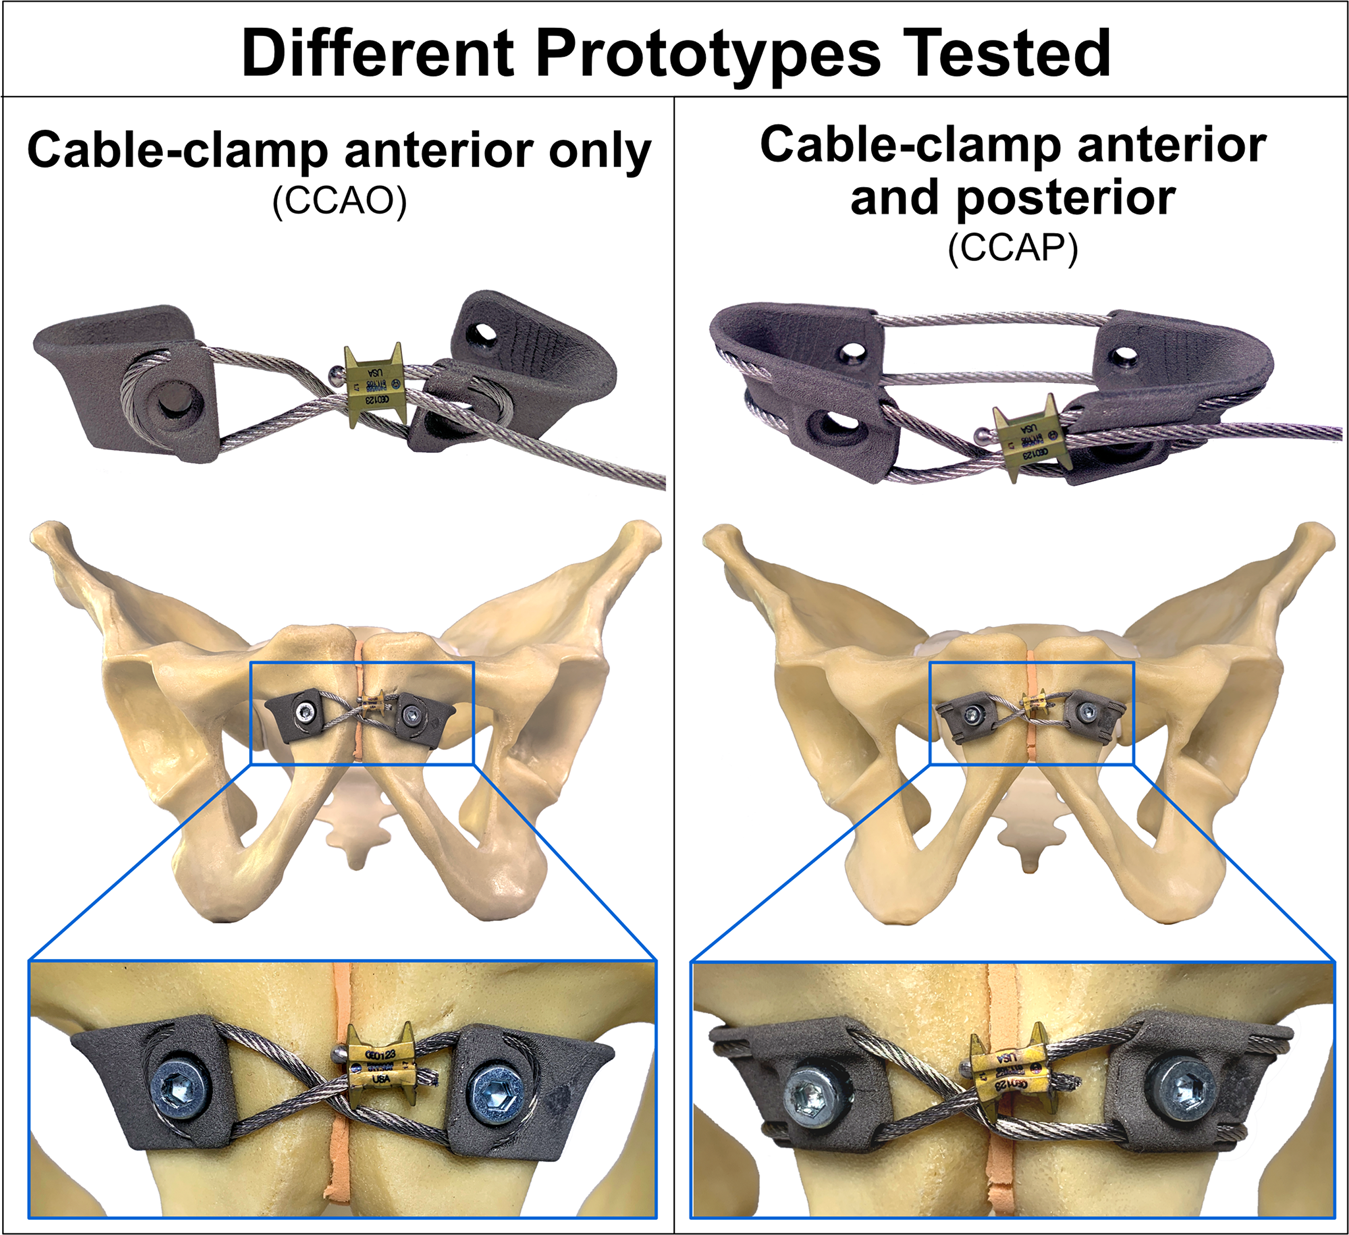 Development and preclinical evaluation of a cable-clamp fixation device for a disrupted pubic symphysis Communications Medicine